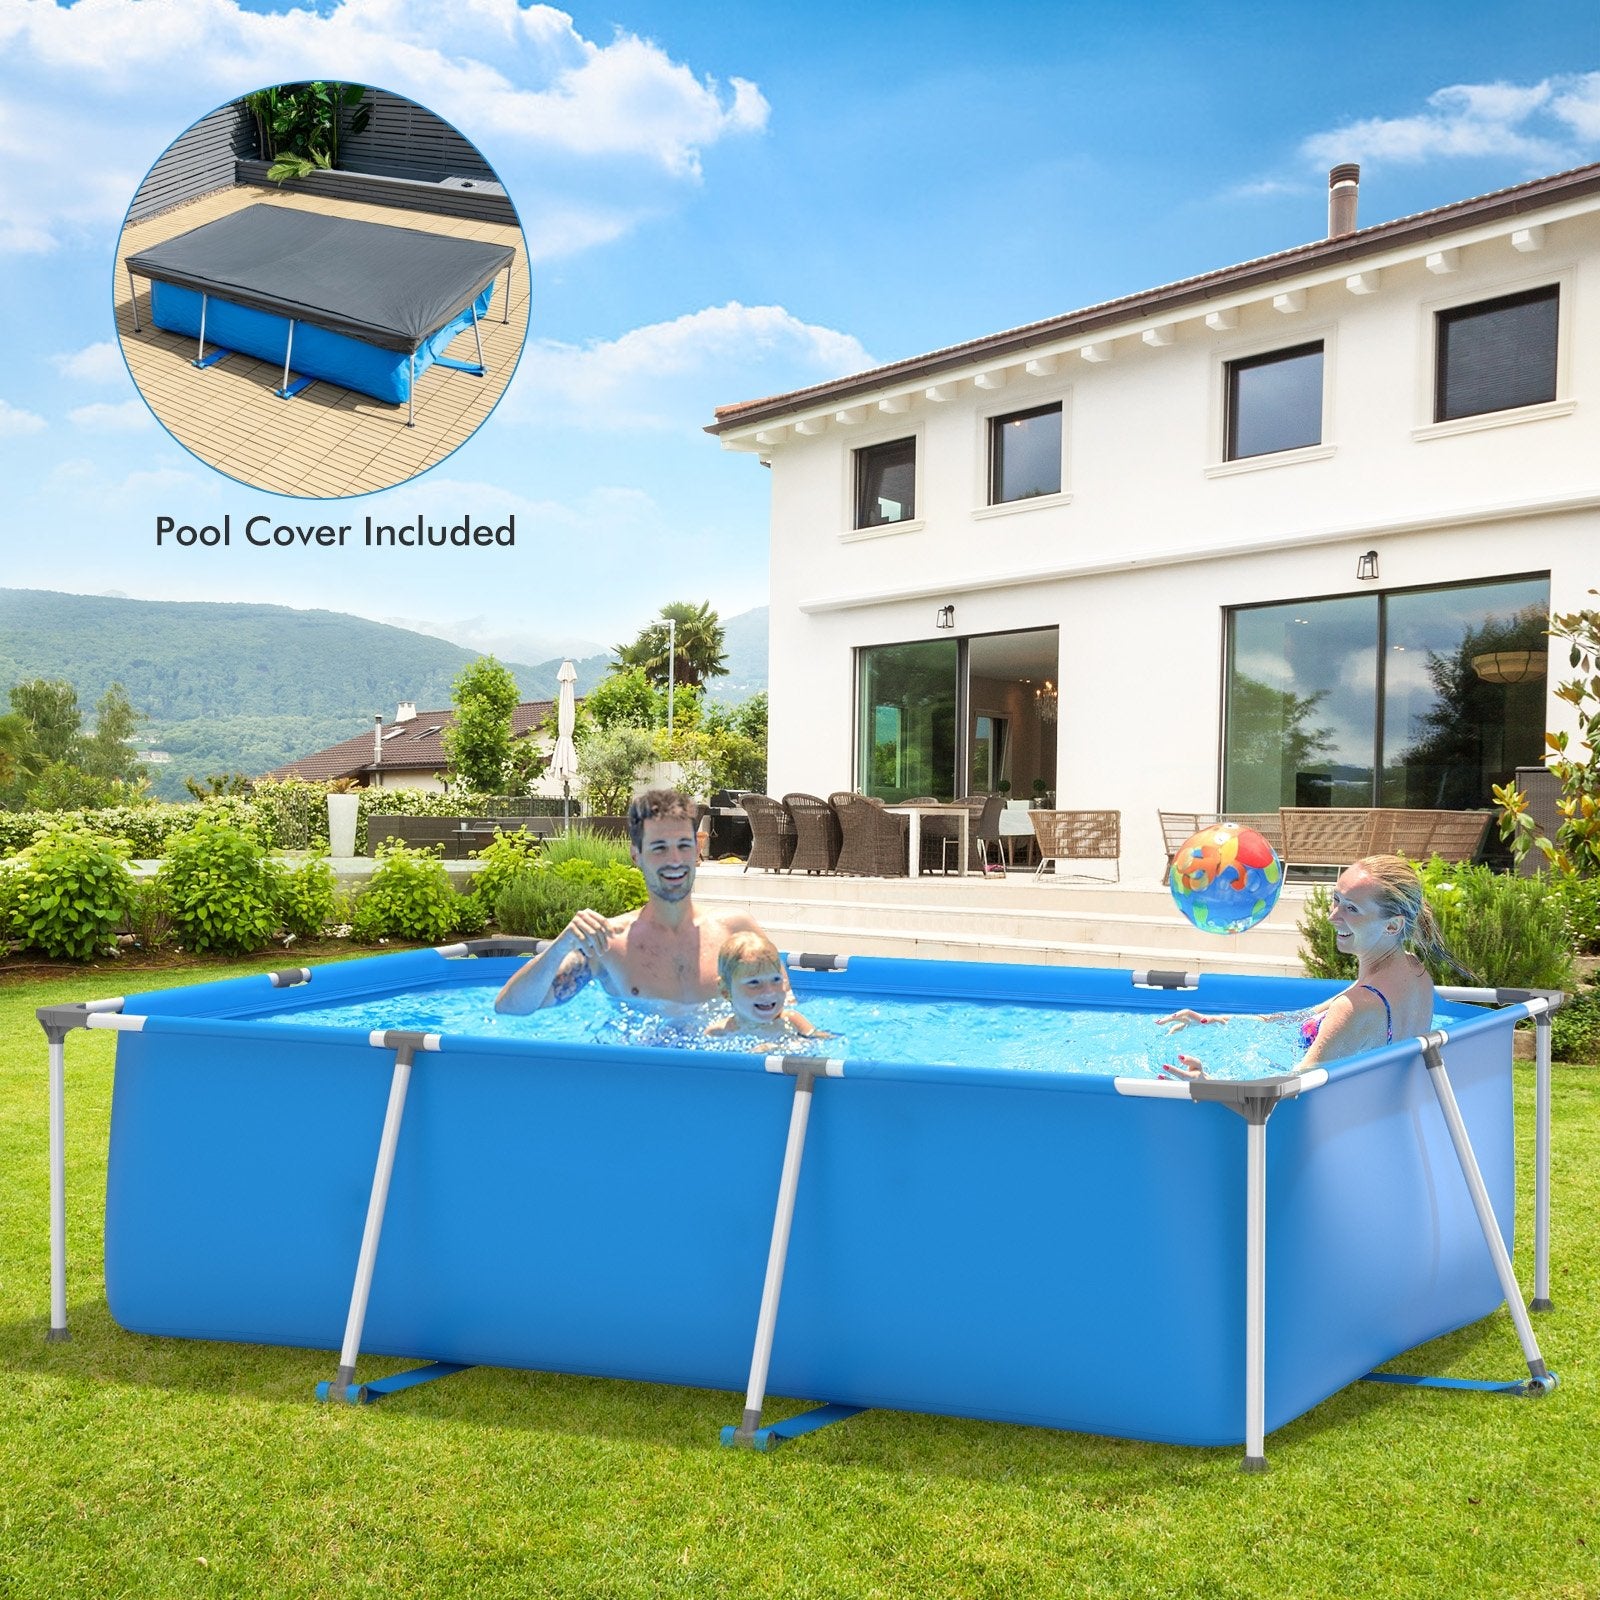 Above Ground Swimming Pool with Pool Cover, Blue at Gallery Canada